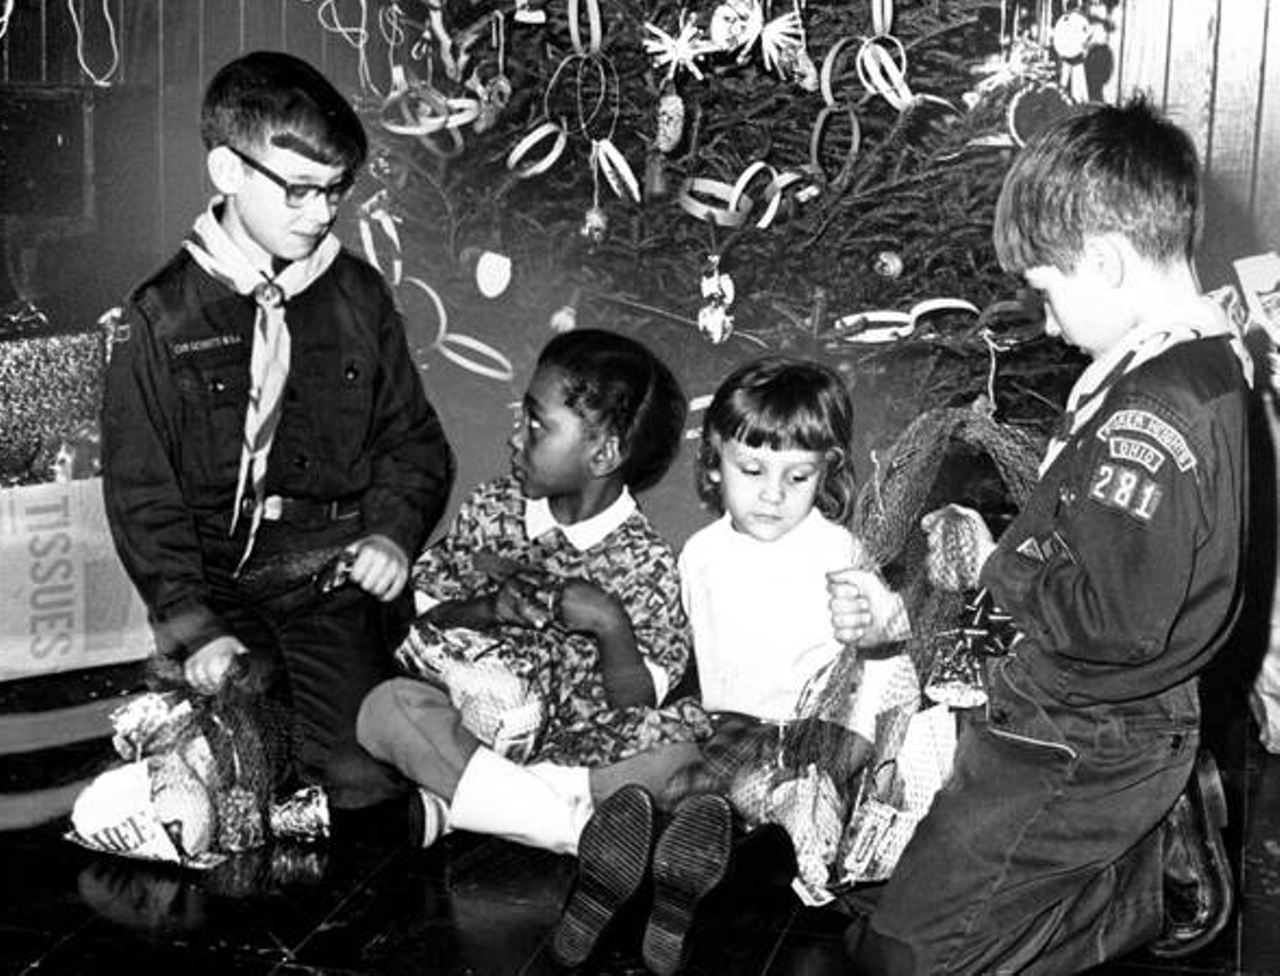 1967: A Cub Scout Christmas party at St. Dominic's Catholic Church in Shaker Hts.